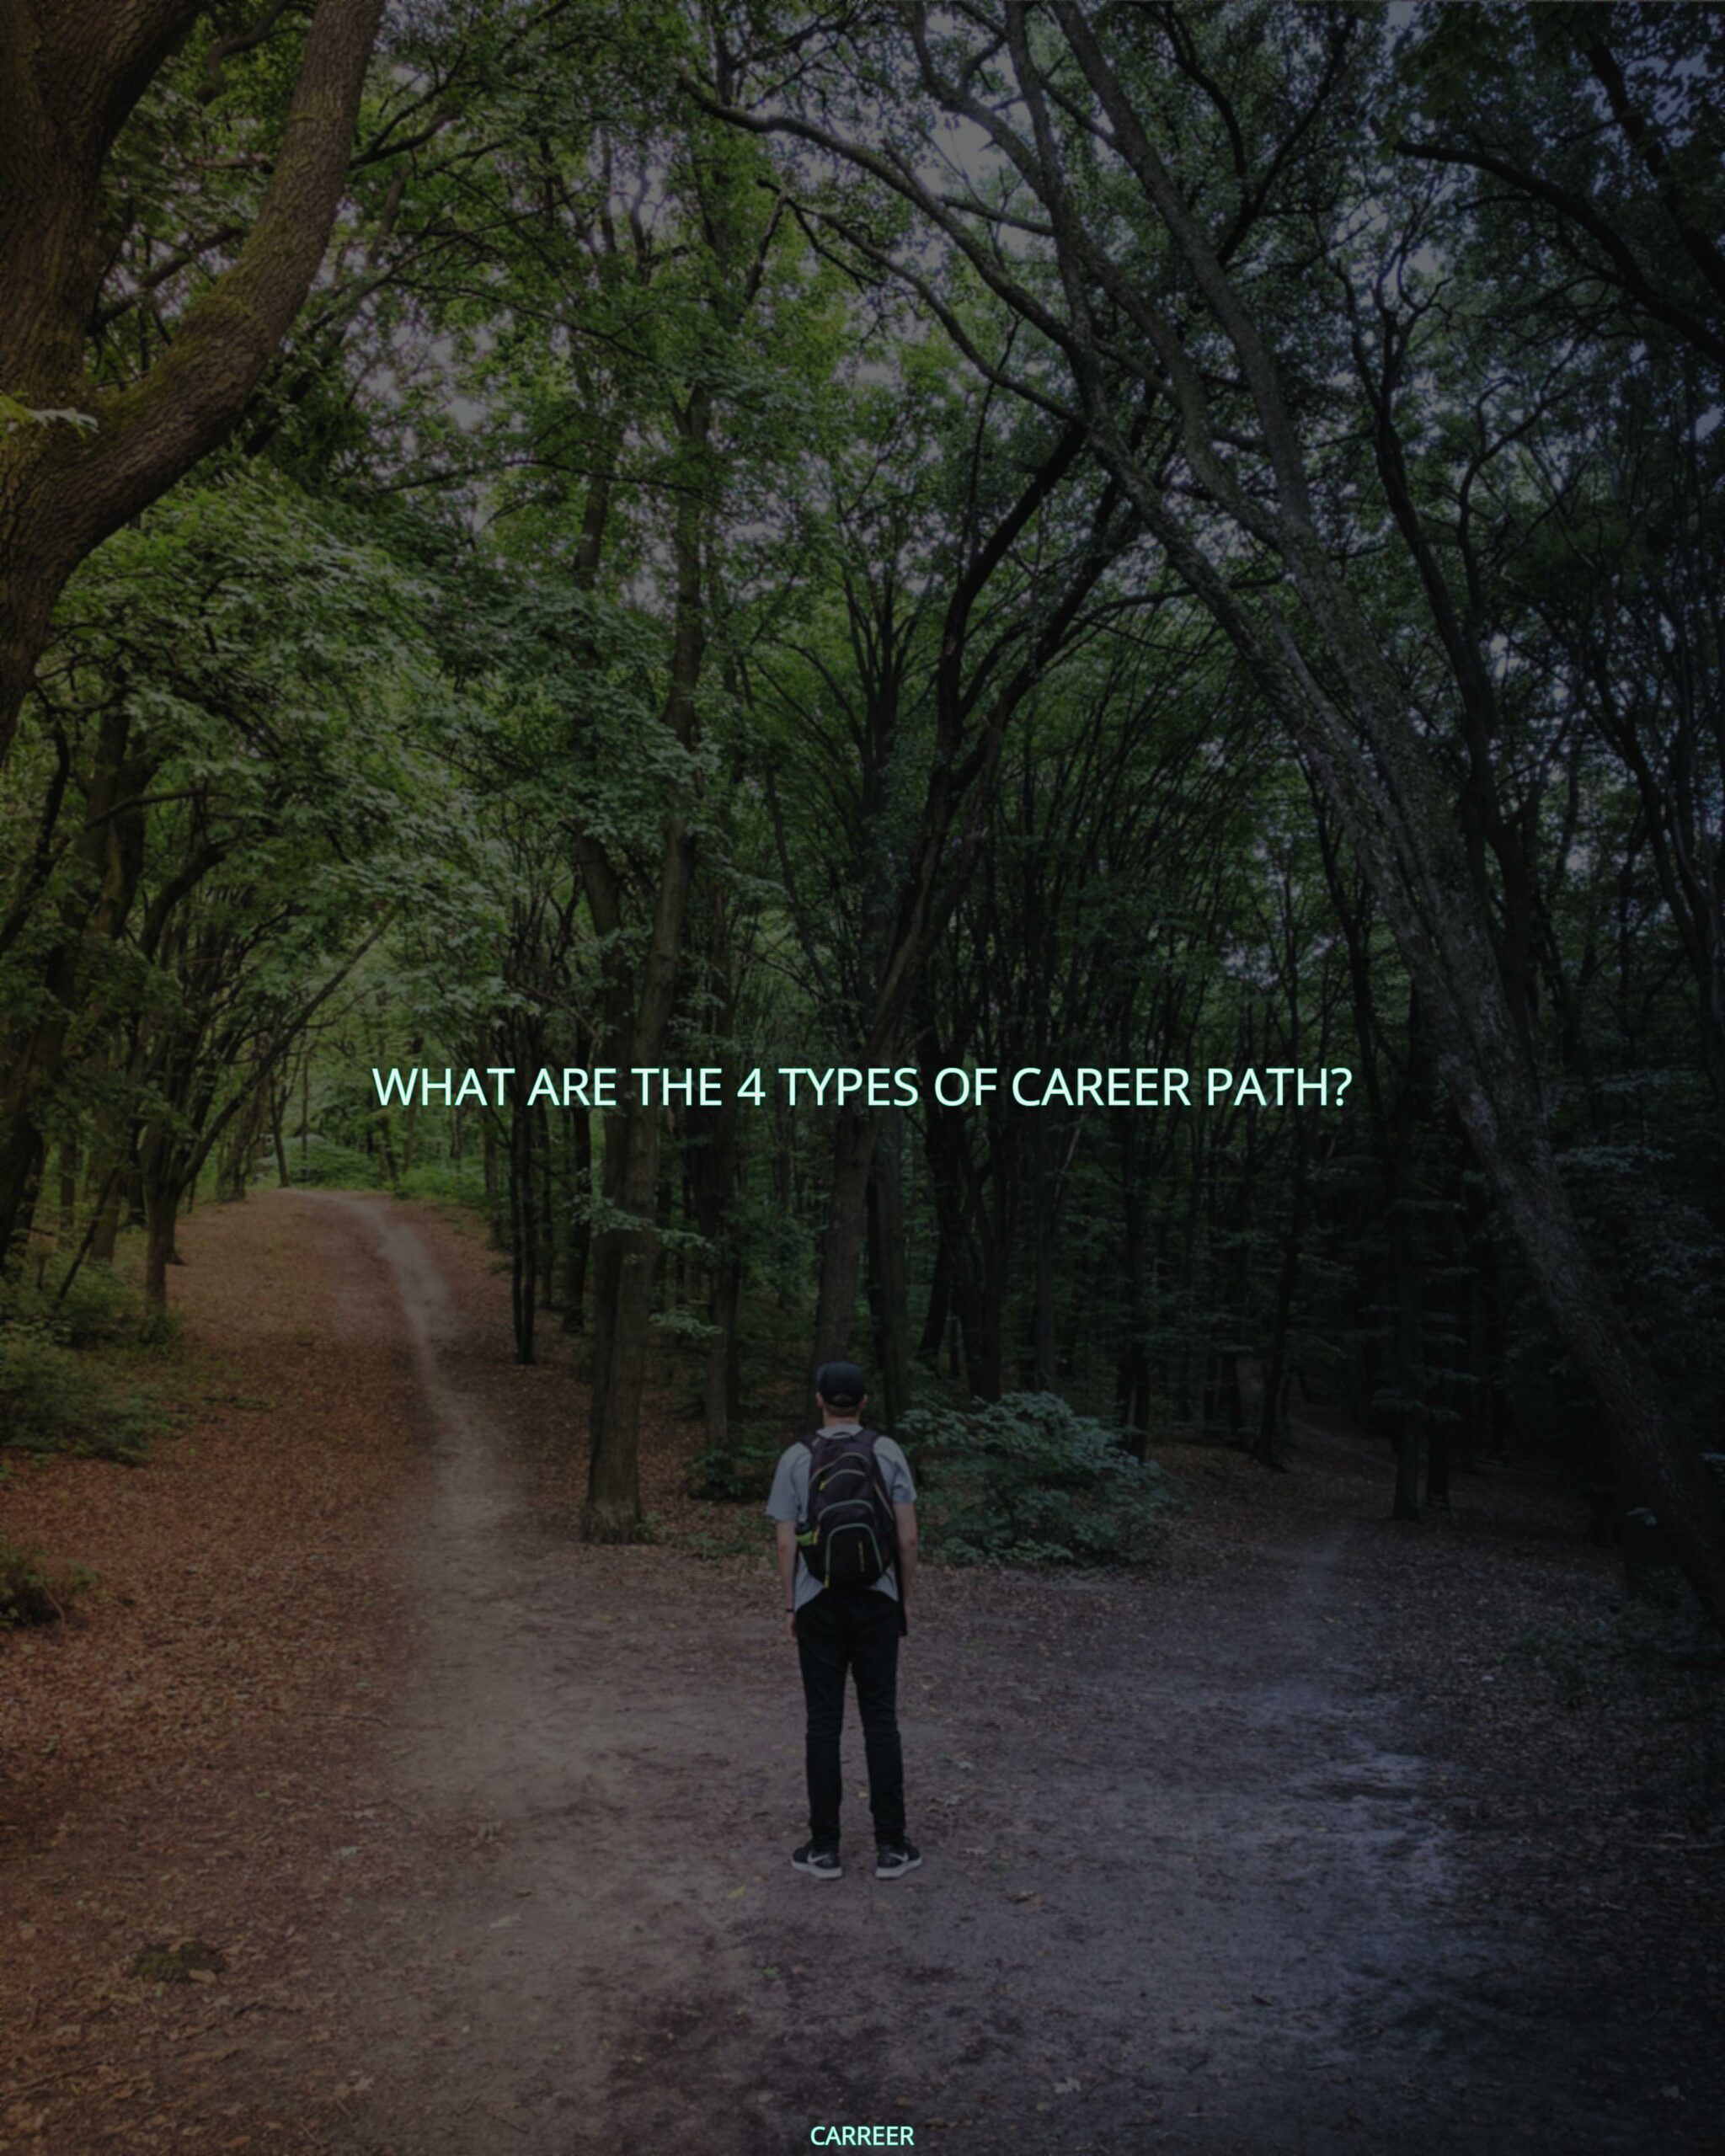 What are the 4 types of career path?